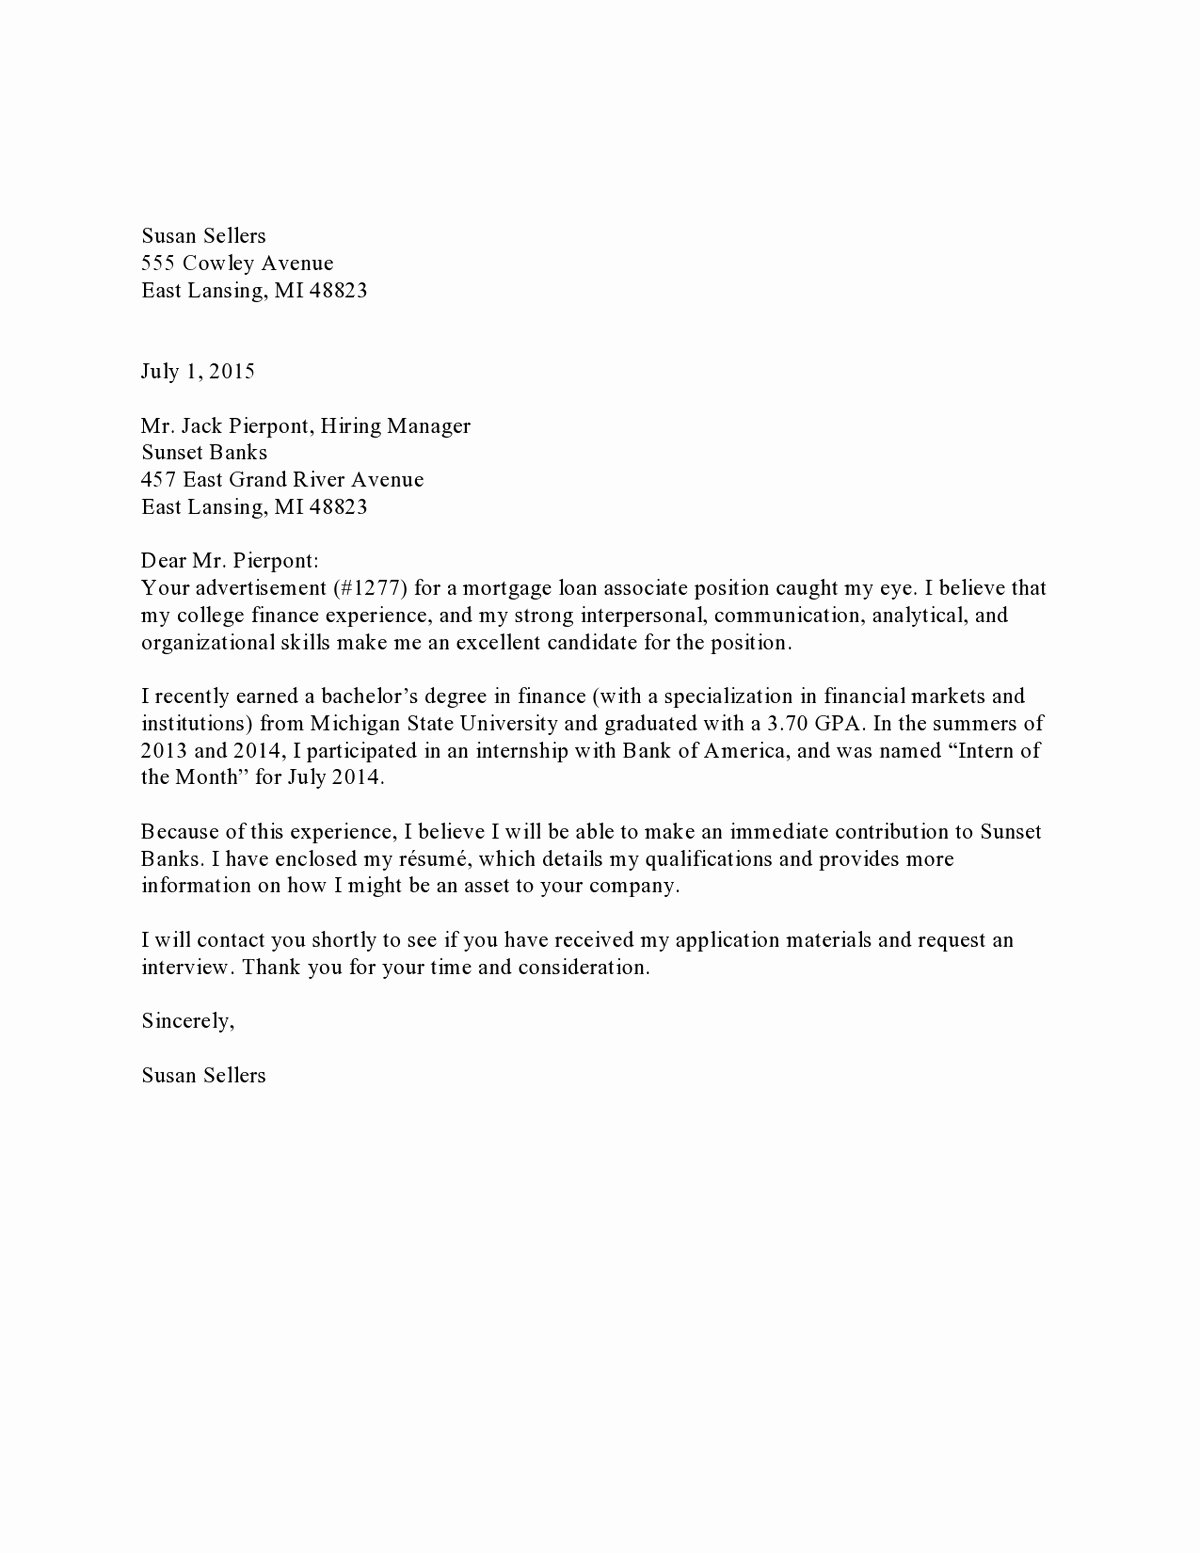 Banking Cover Letter Sample Beautiful Mercial Banking Entry Level Response to Ad Letter